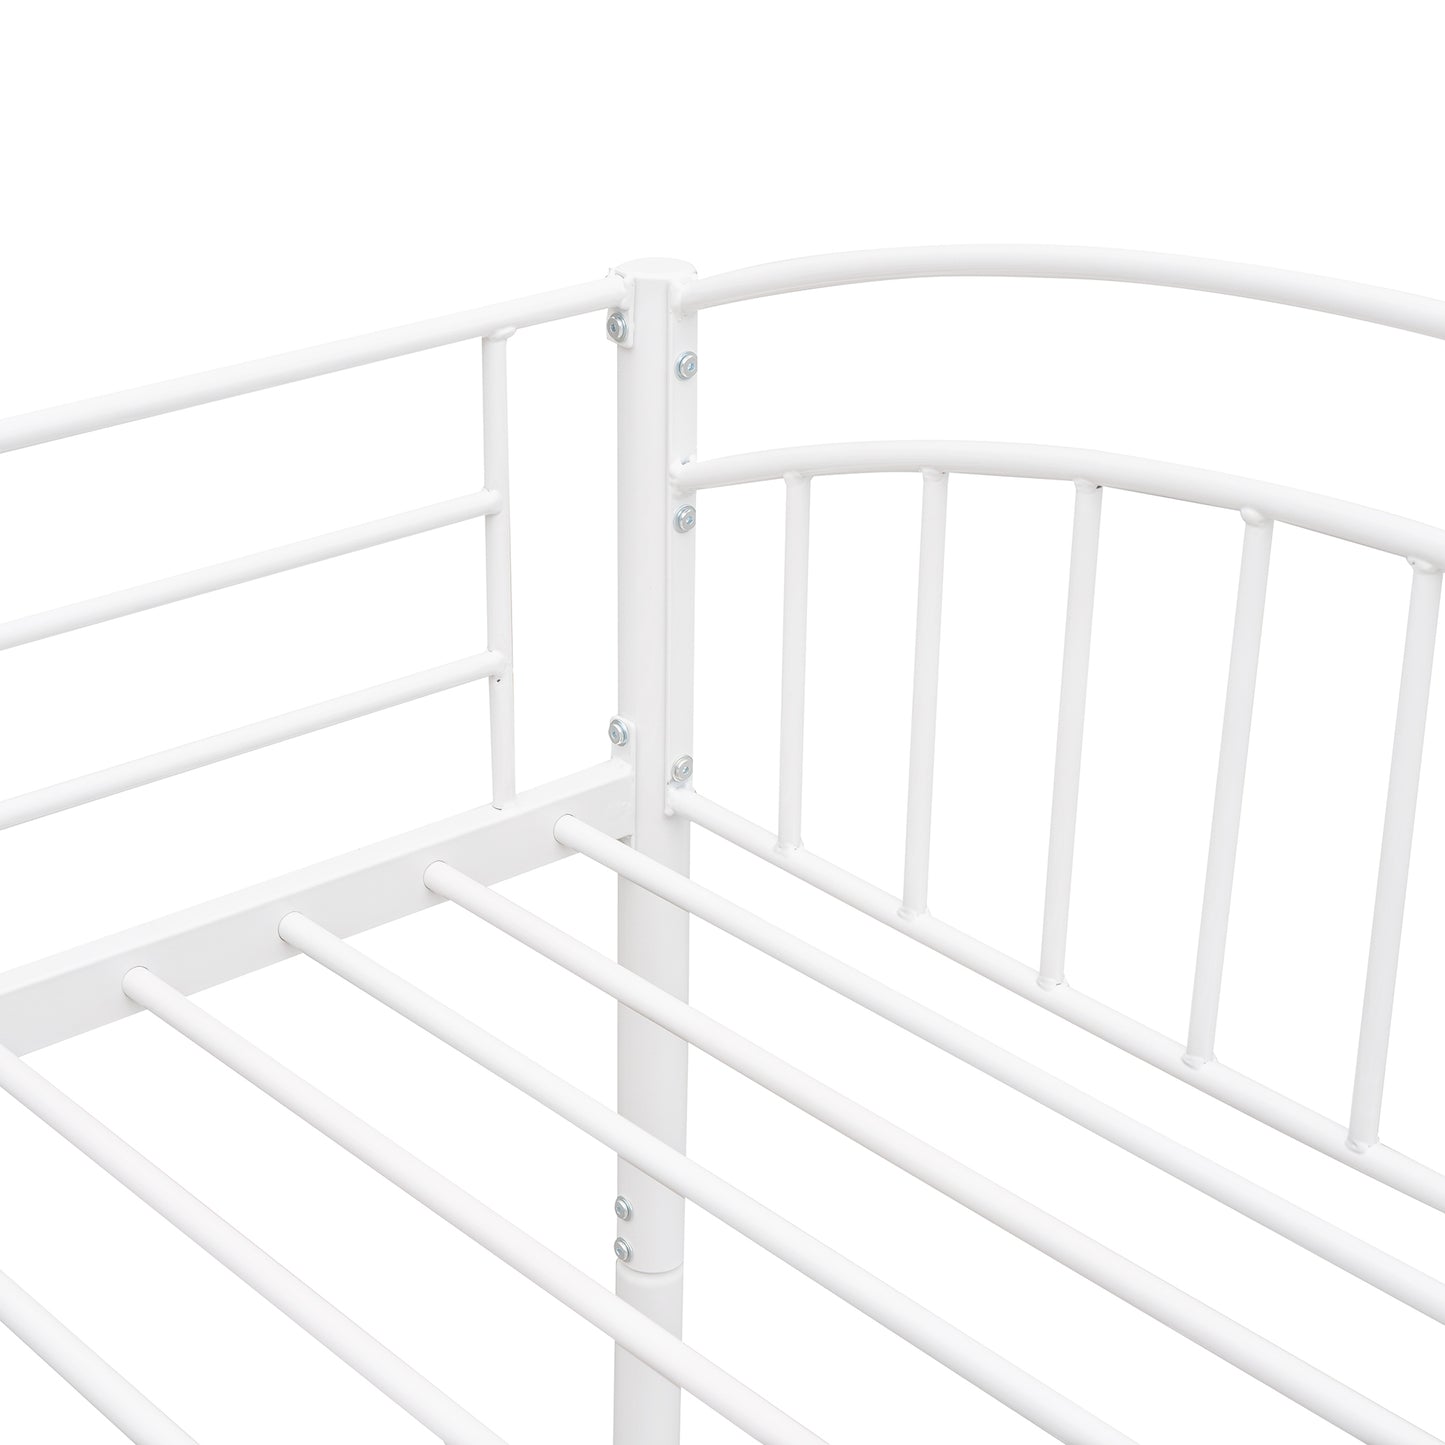 BTMWAY Twin Over Twin Metal Bunk Bed, Heavy Duty Twin Bunk Beds for Kids Teens Adults, Divided into Two Beds No Box Spring Needed, Bunk Bed Twin Over Twin with Guardrails, Ladder, White